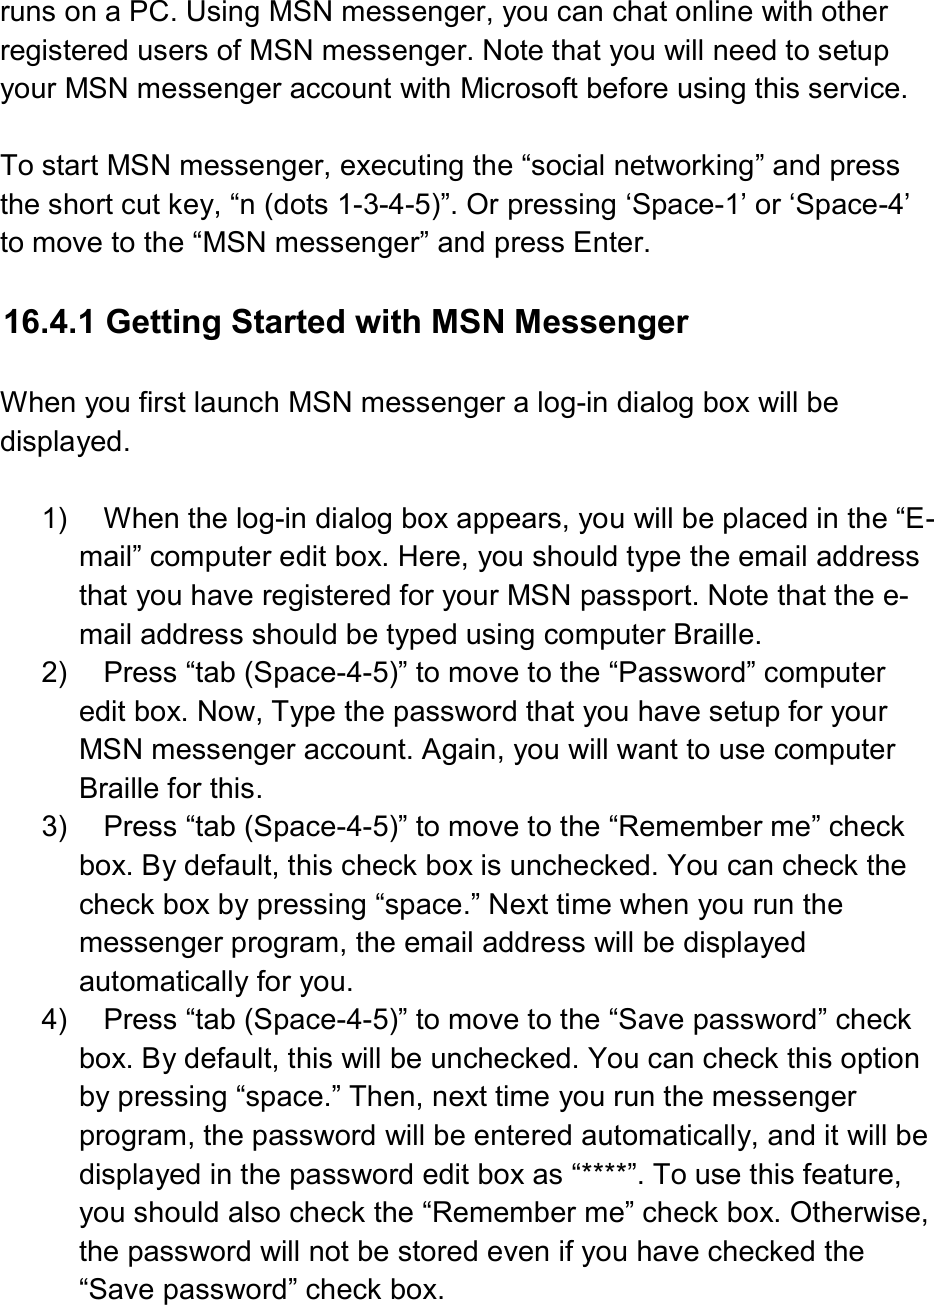  runs on a PC. Using MSN messenger, you can chat online with other registered users of MSN messenger. Note that you will need to setup your MSN messenger account with Microsoft before using this service.  To start MSN messenger, executing the “social networking” and press the short cut key, “n (dots 1-3-4-5)”. Or pressing ‘Space-1’ or ‘Space-4’ to move to the “MSN messenger” and press Enter.  16.4.1 Getting Started with MSN Messenger  When you first launch MSN messenger a log-in dialog box will be displayed.  1)  When the log-in dialog box appears, you will be placed in the “E-mail” computer edit box. Here, you should type the email address that you have registered for your MSN passport. Note that the e-mail address should be typed using computer Braille. 2)  Press “tab (Space-4-5)” to move to the “Password” computer edit box. Now, Type the password that you have setup for your MSN messenger account. Again, you will want to use computer Braille for this. 3)  Press “tab (Space-4-5)” to move to the “Remember me” check box. By default, this check box is unchecked. You can check the check box by pressing “space.” Next time when you run the messenger program, the email address will be displayed automatically for you. 4)  Press “tab (Space-4-5)” to move to the “Save password” check box. By default, this will be unchecked. You can check this option by pressing “space.” Then, next time you run the messenger program, the password will be entered automatically, and it will be displayed in the password edit box as “****”. To use this feature, you should also check the “Remember me” check box. Otherwise, the password will not be stored even if you have checked the “Save password” check box. 